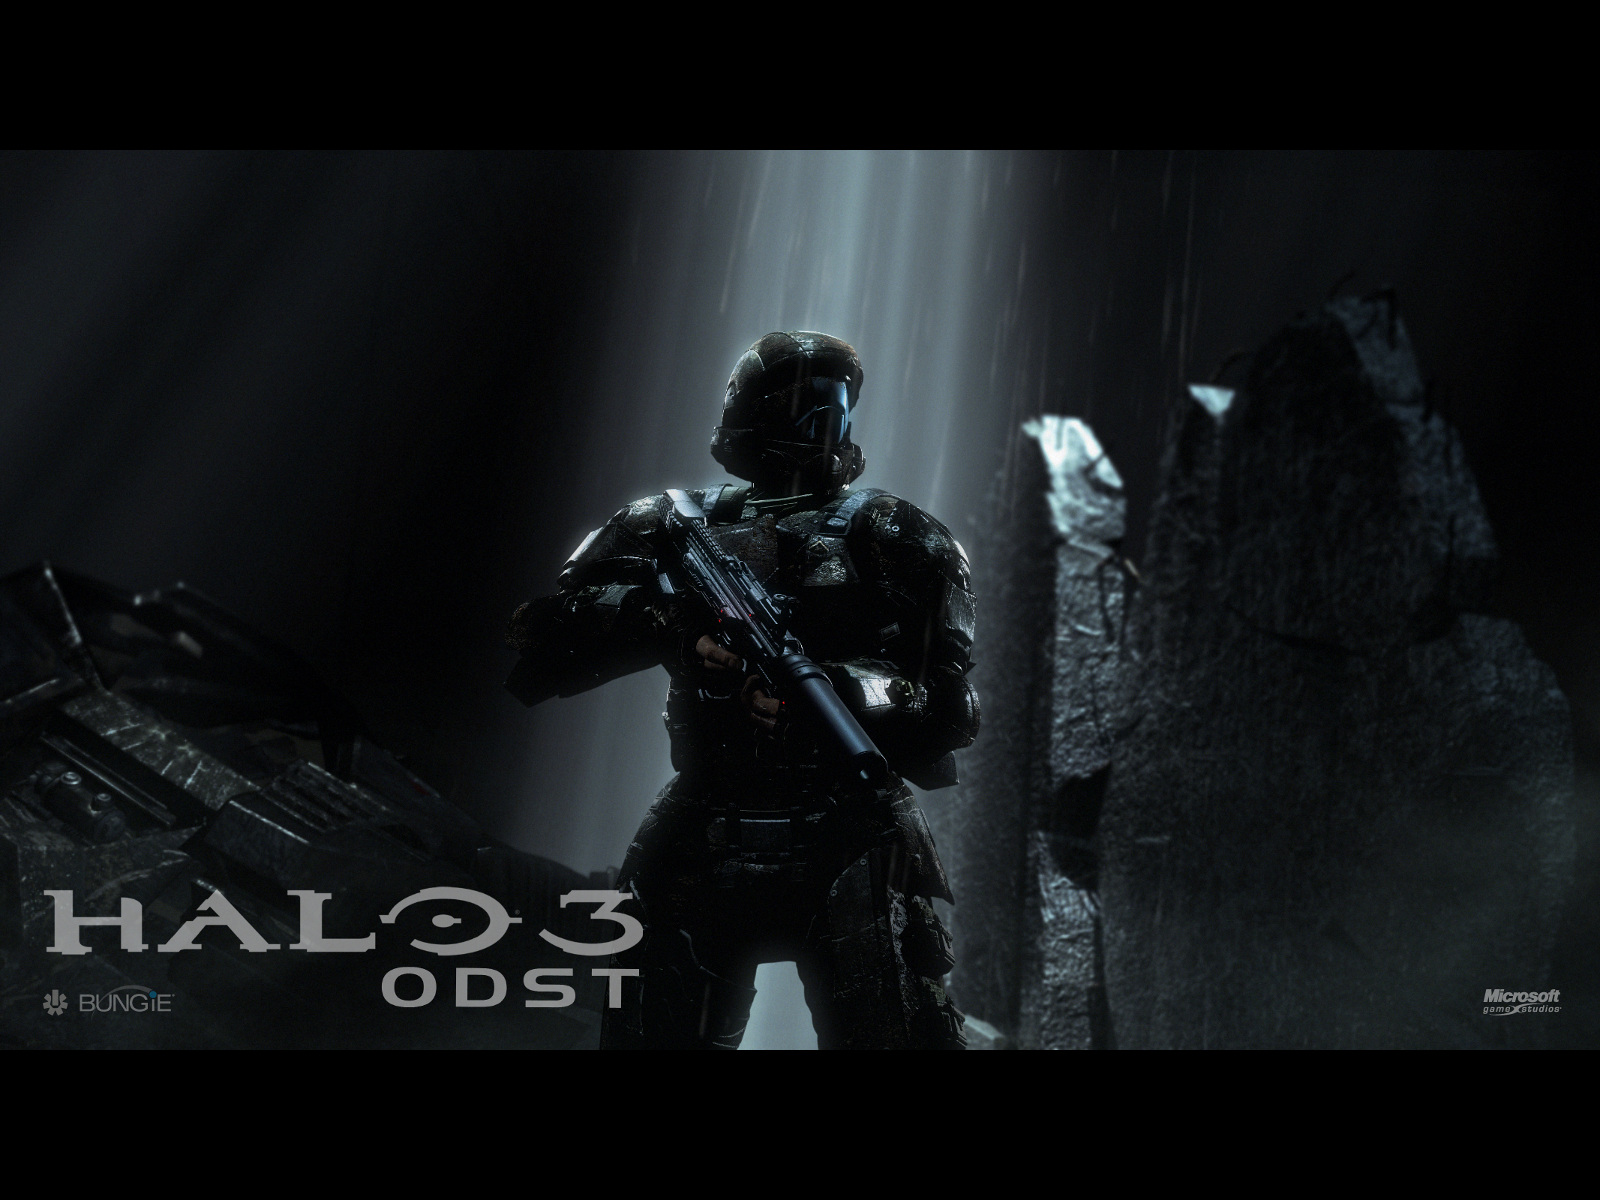 Halo Odst Desktop Wallpaper For HD Widescreen And Mobile